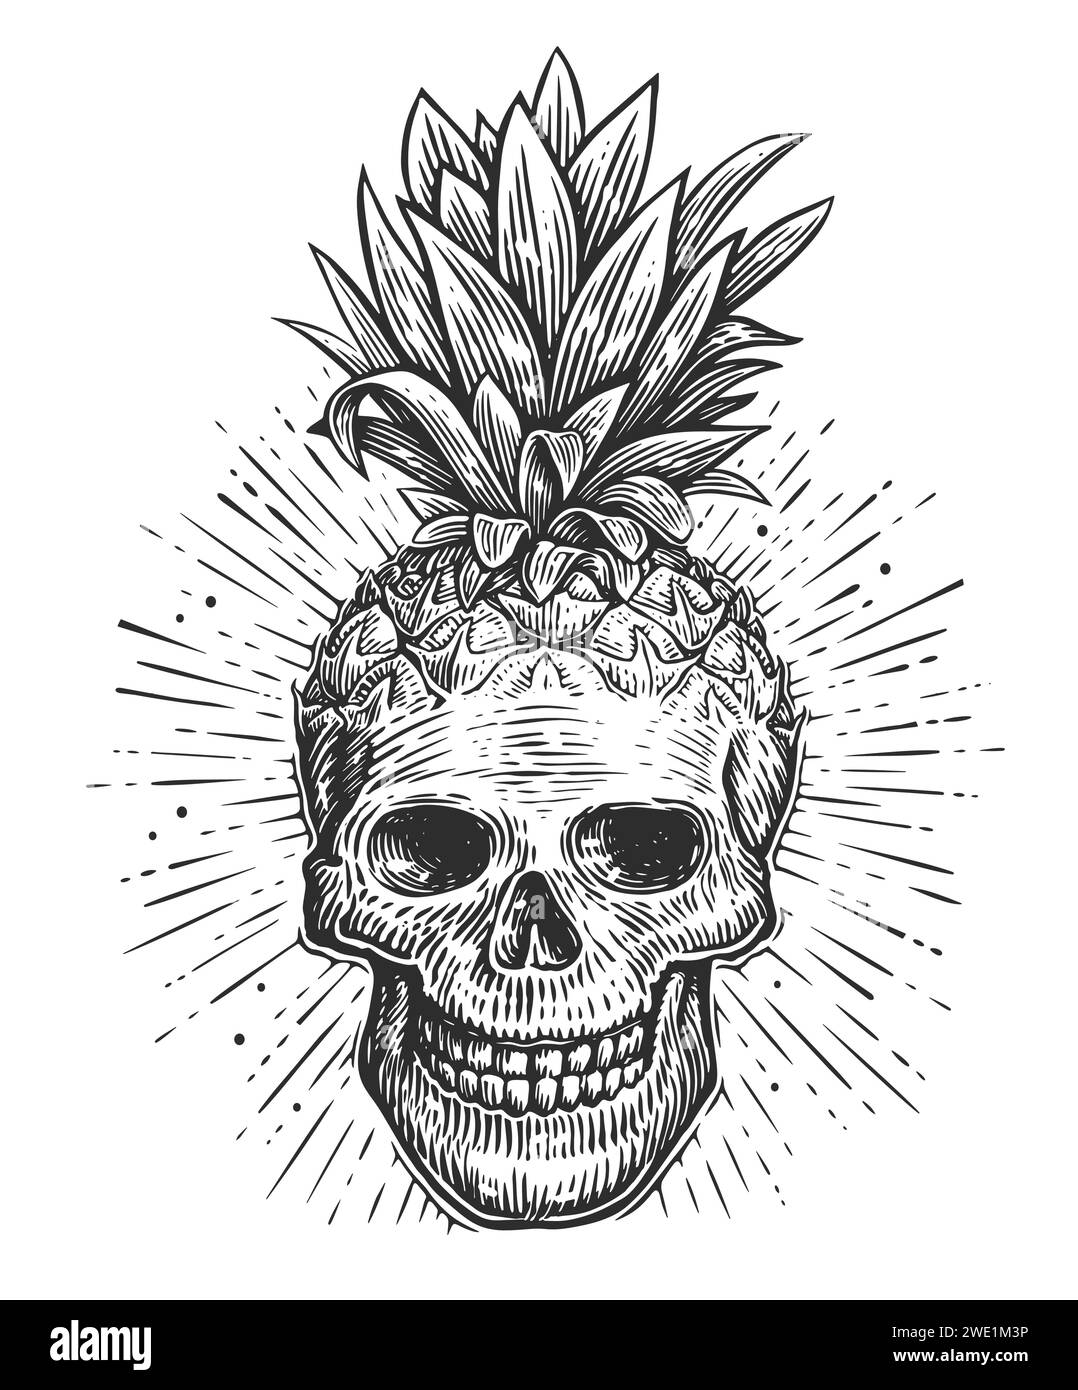 Human skull with leaves. Skeleton head sketch. Hand drawn creative vector illustration Stock Vector